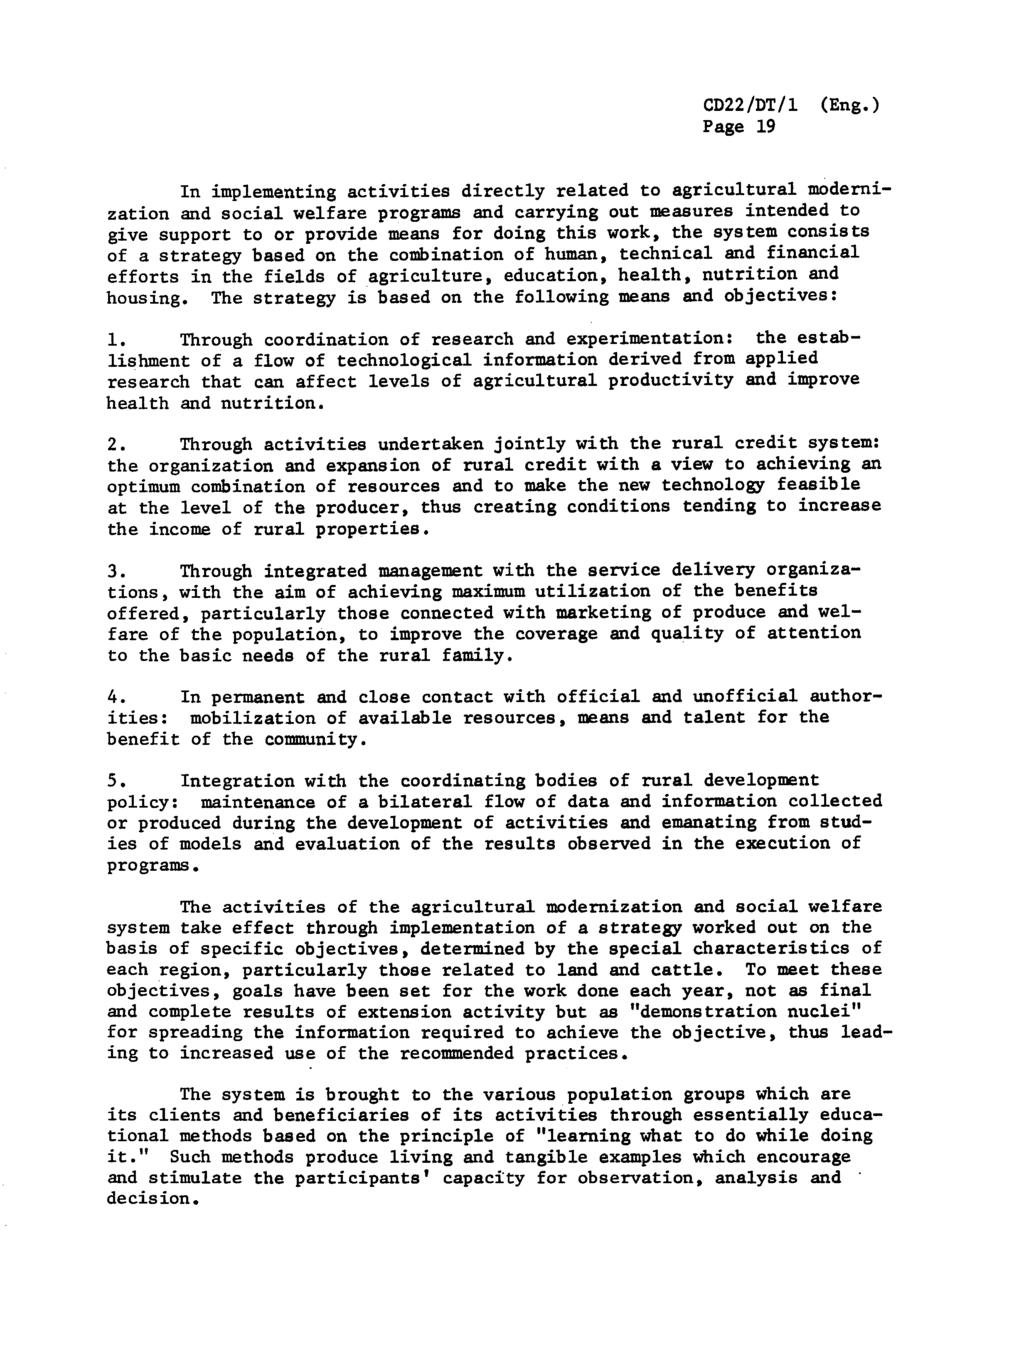 Page 19 In implementing activities directly related to agricultural modernization and social welfare programs and carrying out measures intended to give support to or provide means for doing this